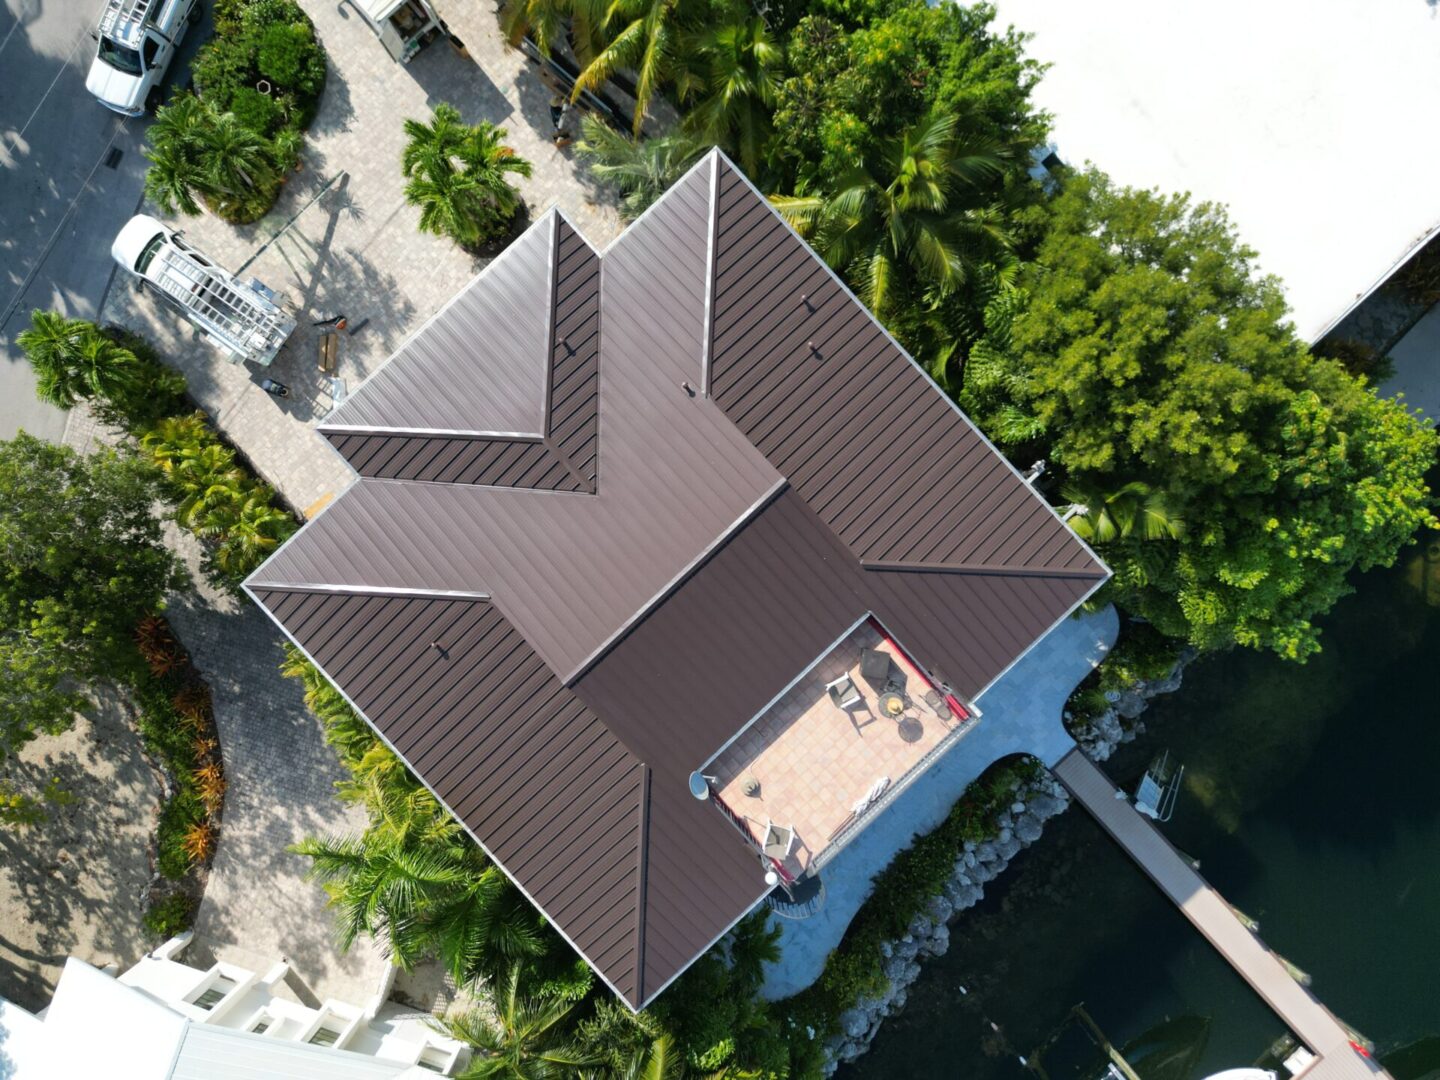 A top view of a house showing its brown roof